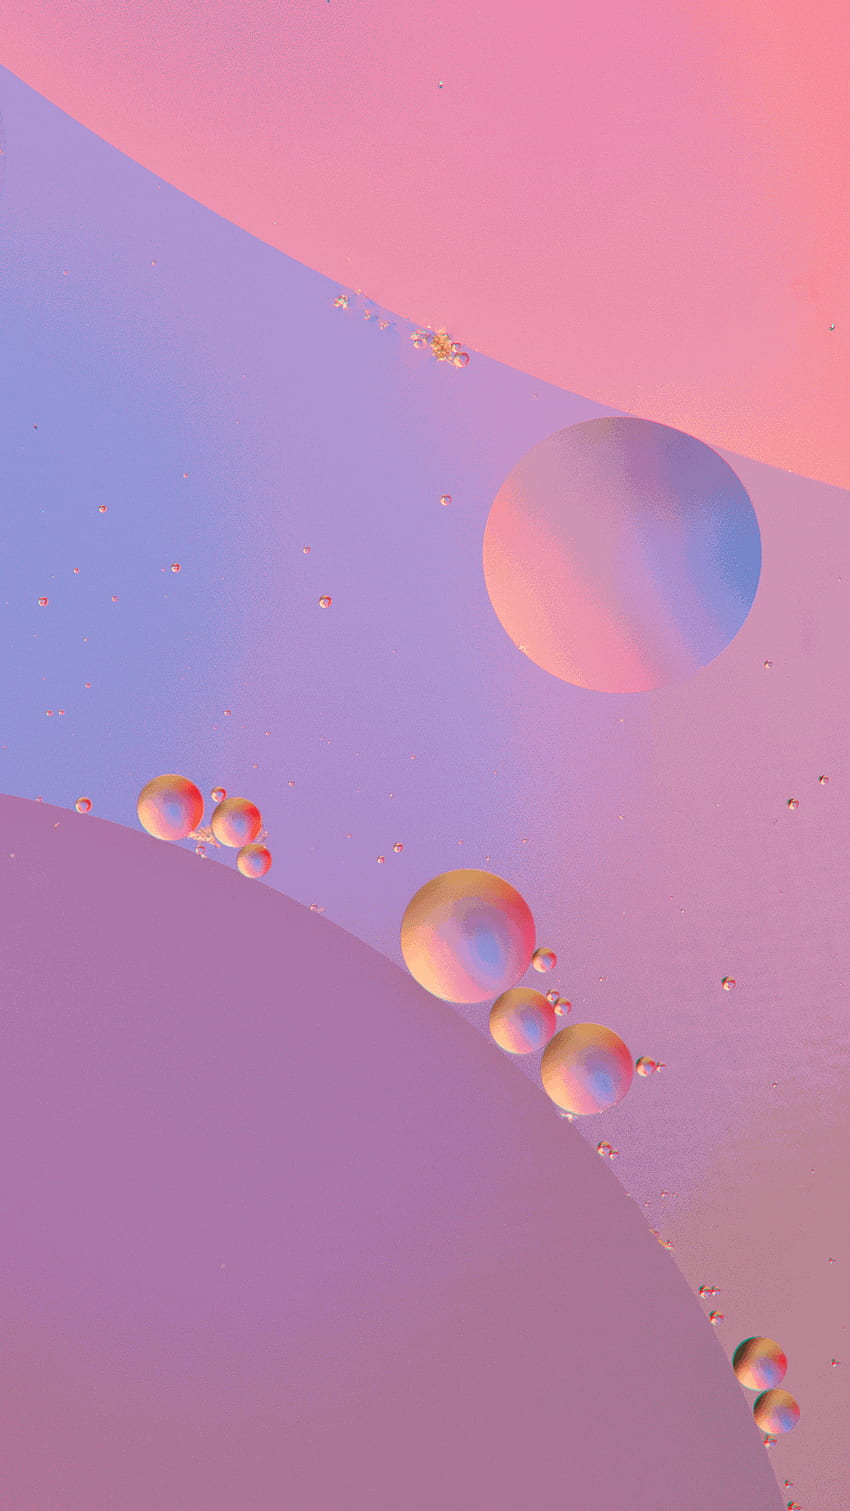 From The Verge, Pixel Pink HD phone wallpaper | Pxfuel